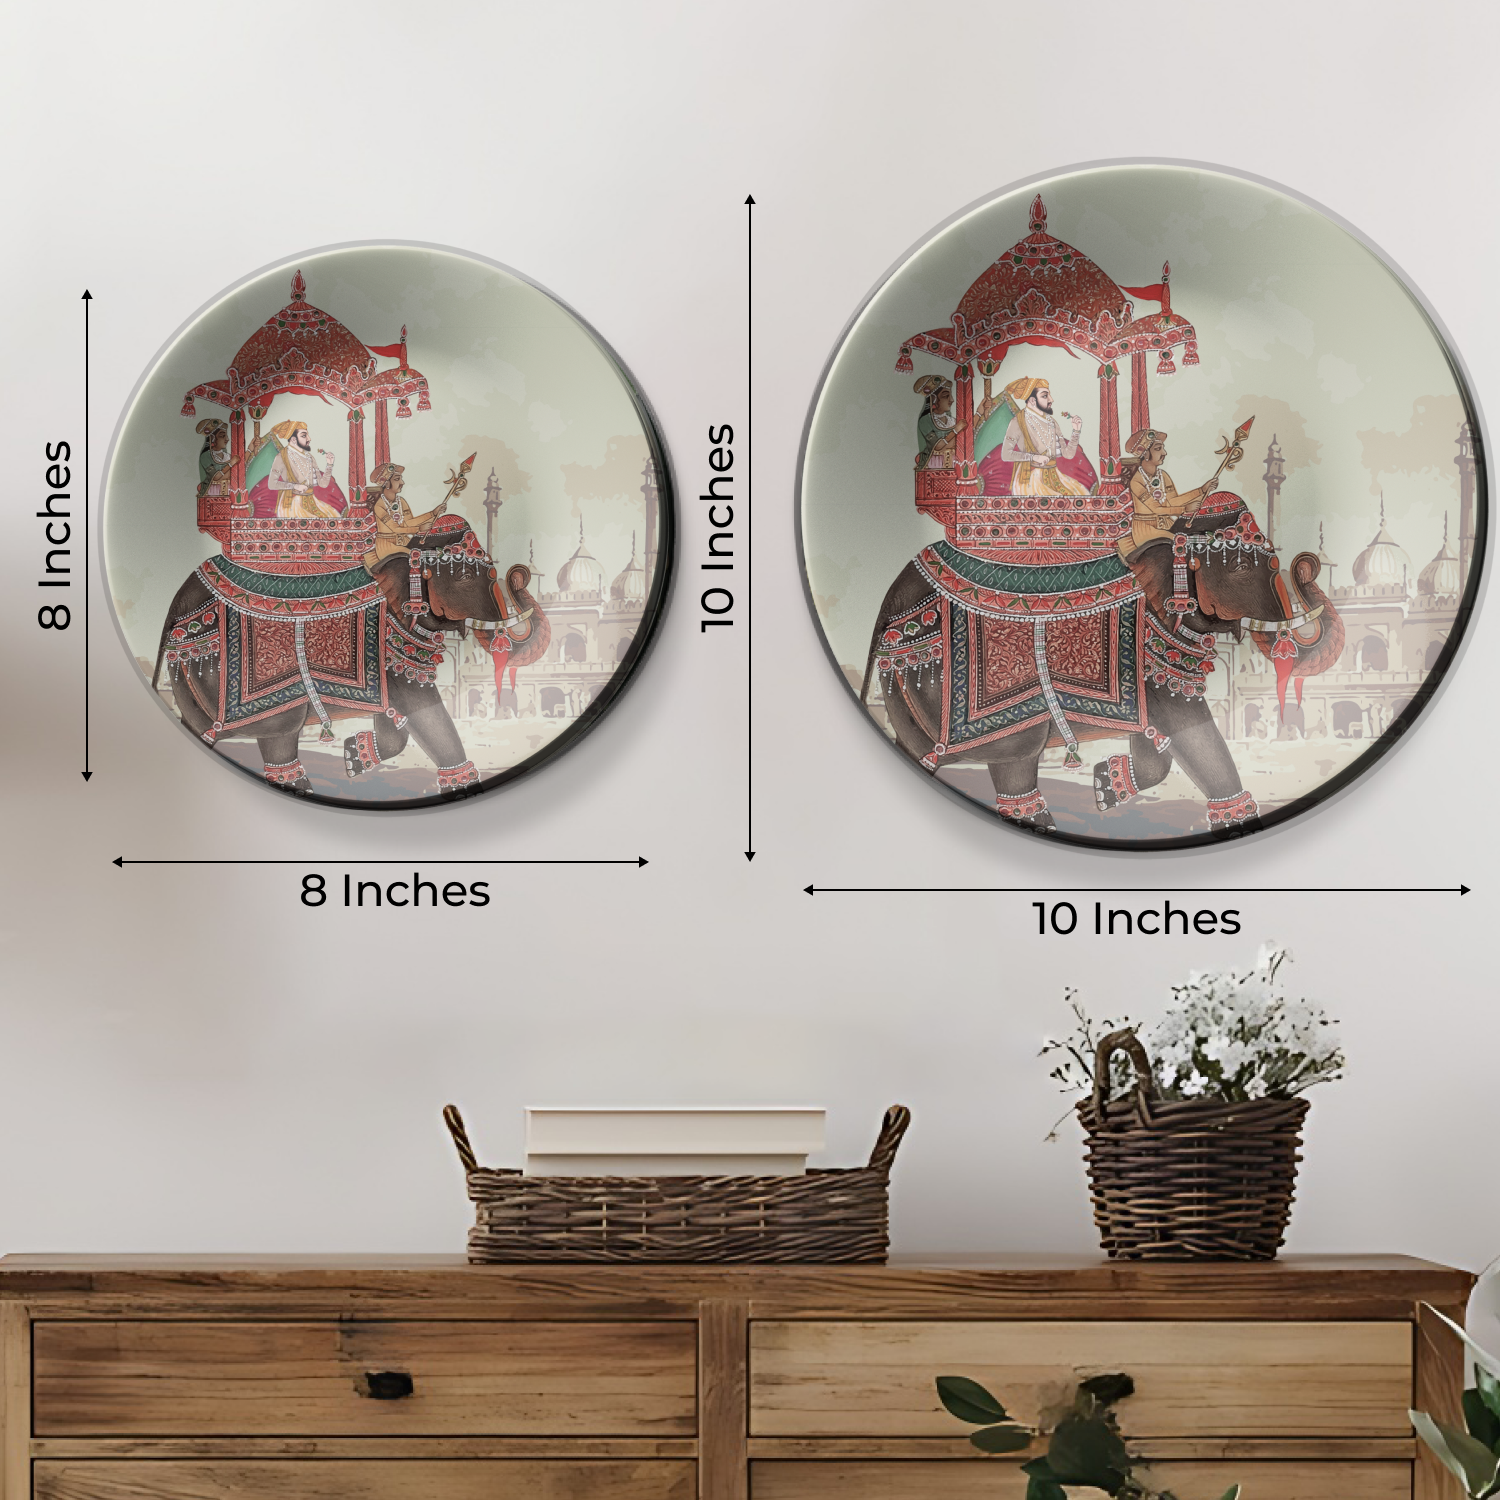 royal themed king sitting on elephant decorative plates to hang on wall